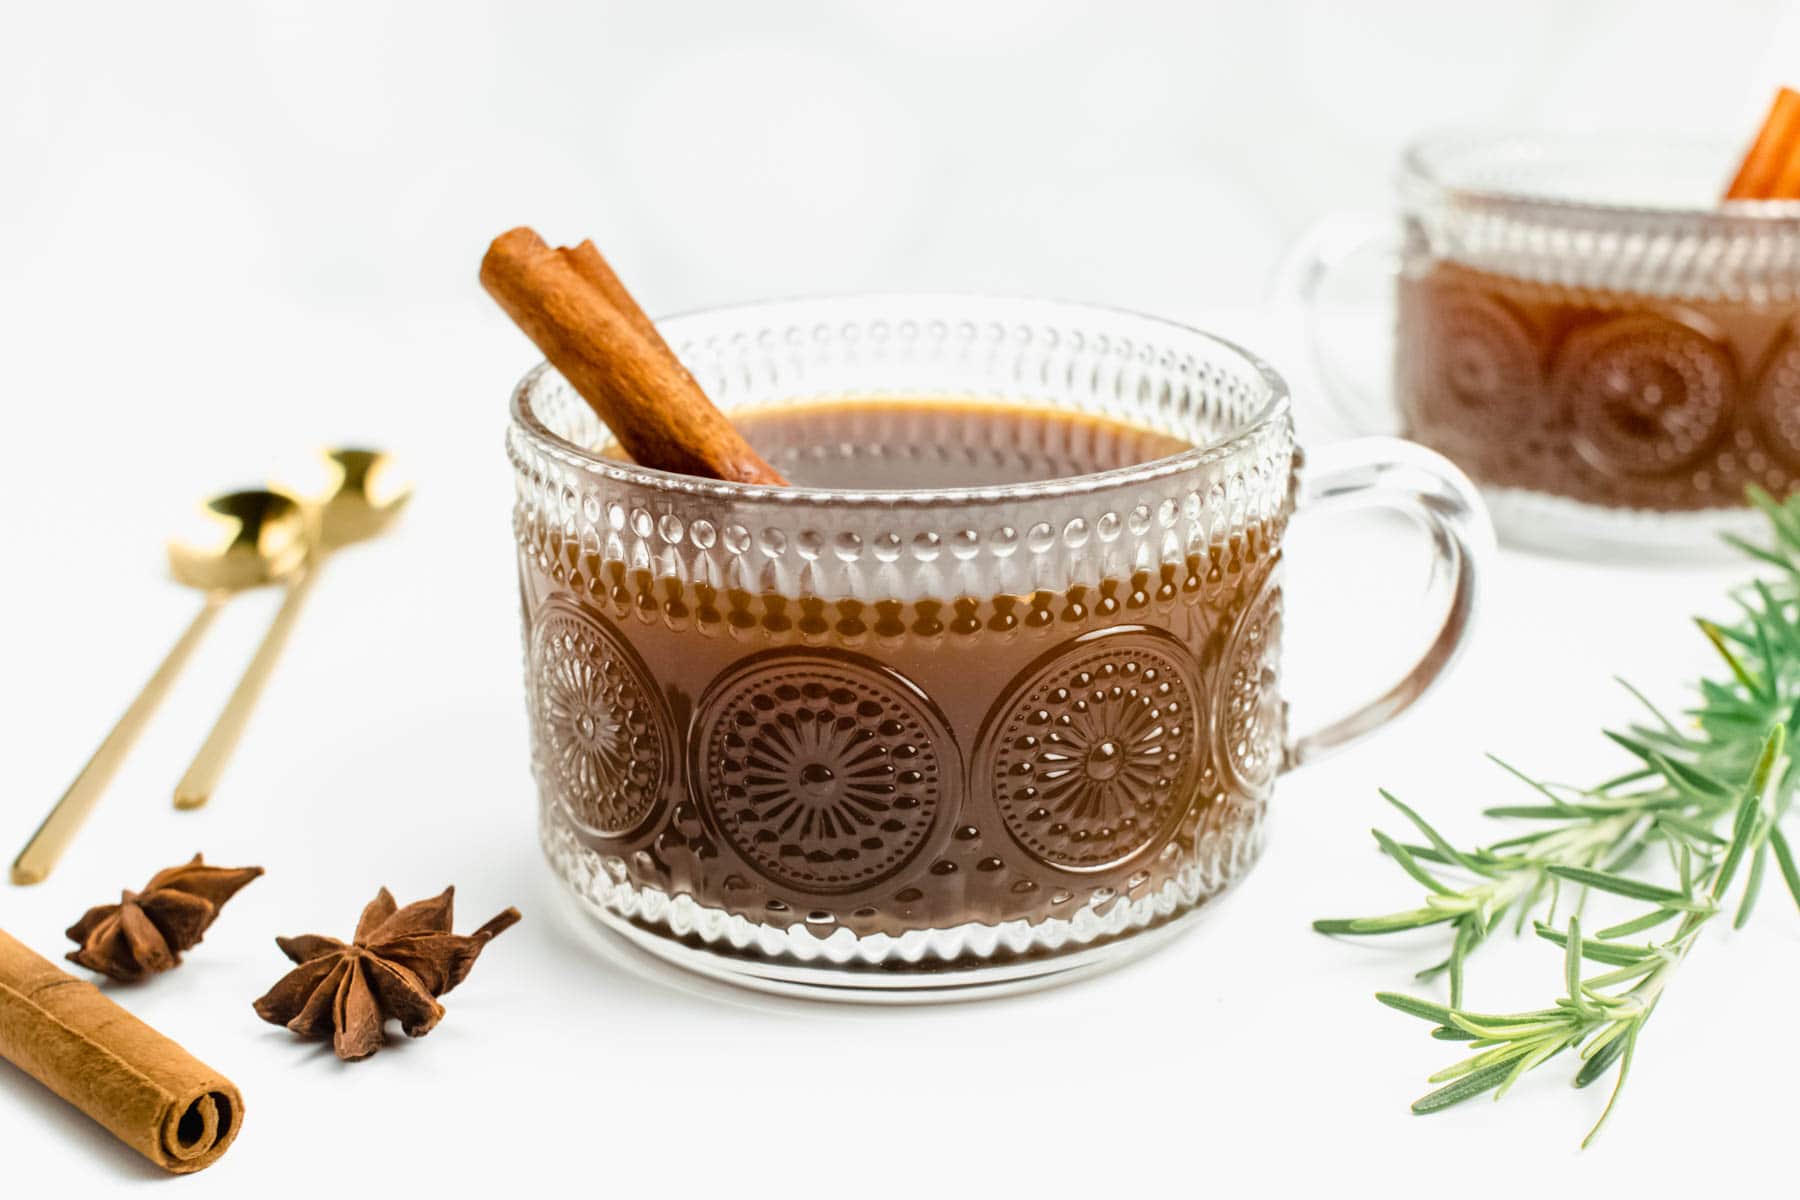 A glass mug holds a warm cider drink surrounded by whole spices and rosemary sprigs.